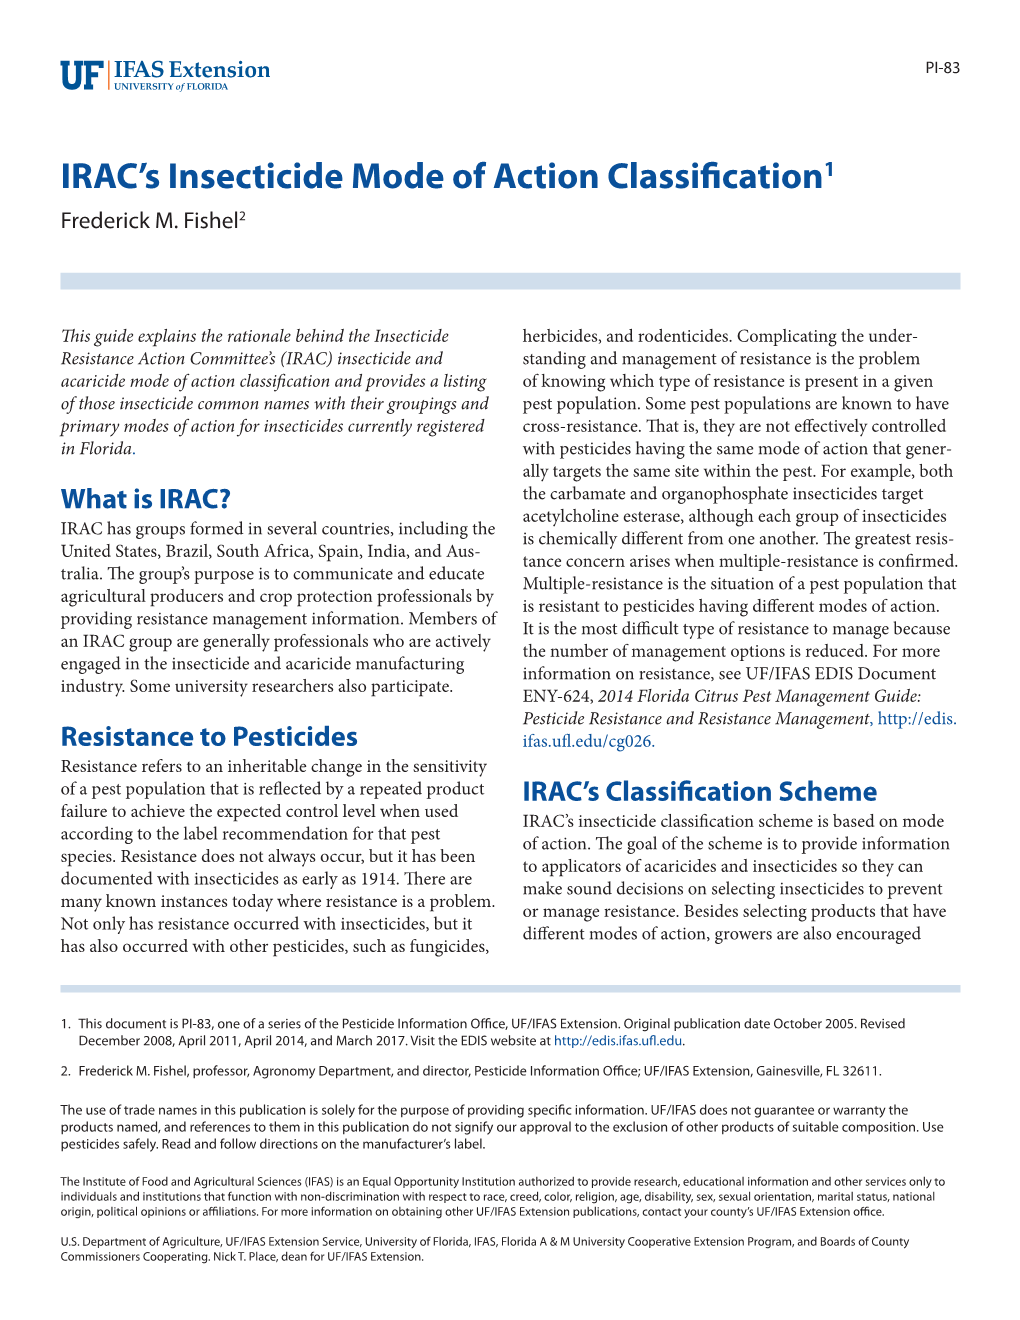 IRAC's Insecticide Mode of Action Classification